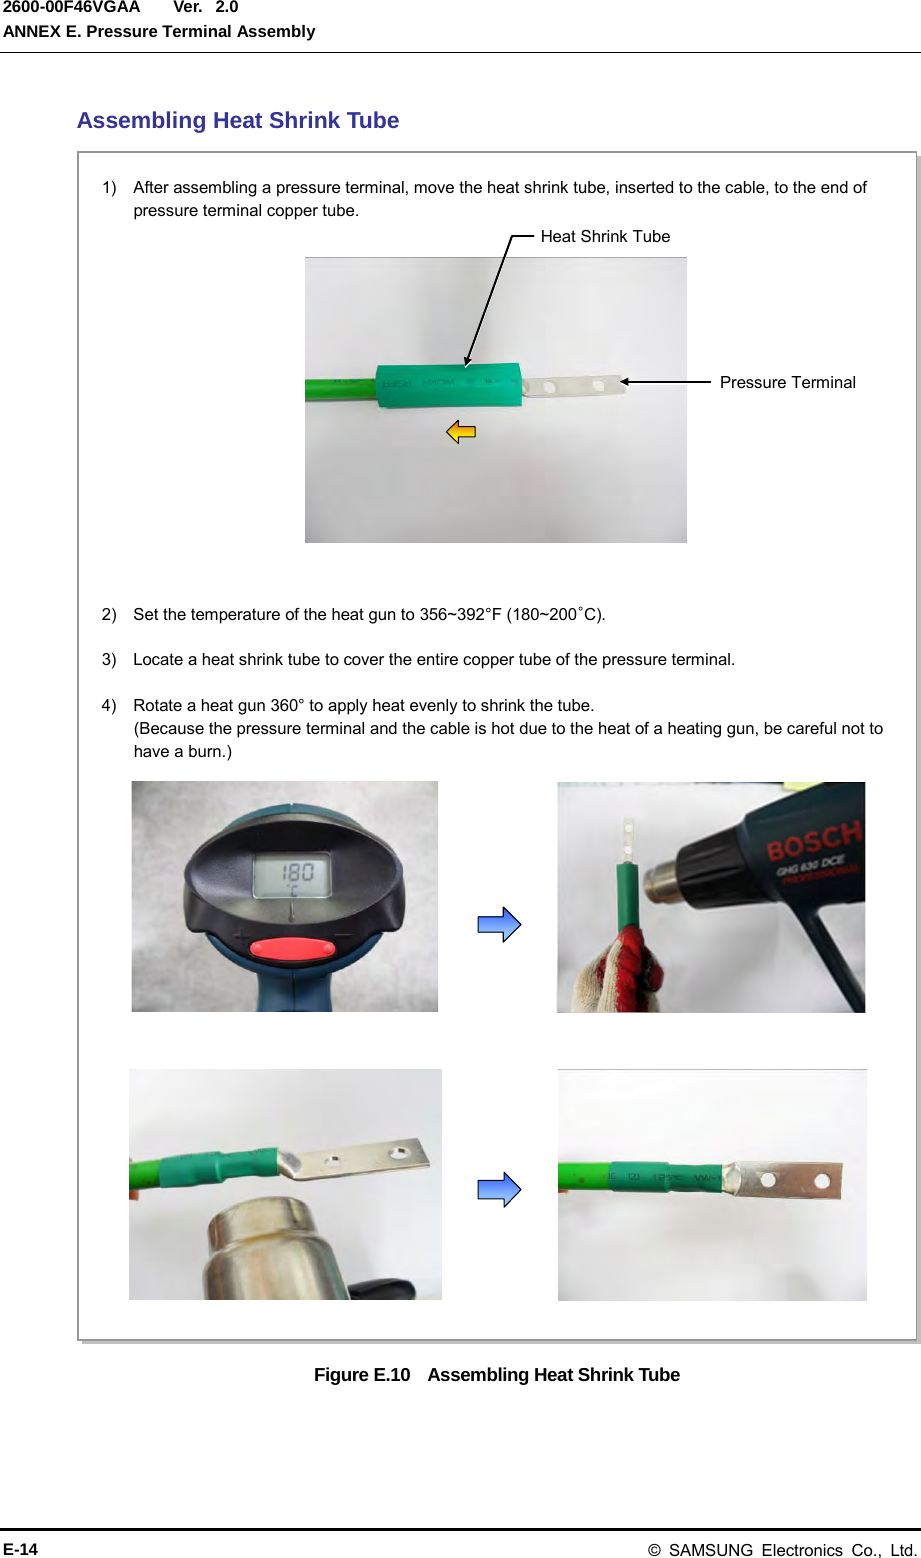  Ver.  ANNEX E. Pressure Terminal Assembly 2600-00F46VGAA 2.0 Assembling Heat Shrink Tube Figure E.10    Assembling Heat Shrink Tube 2)   Set the temperature of the heat gun to 356~392°F (180~200°C).  3)    Locate a heat shrink tube to cover the entire copper tube of the pressure terminal.  4)    Rotate a heat gun 360° to apply heat evenly to shrink the tube. (Because the pressure terminal and the cable is hot due to the heat of a heating gun, be careful not to have a burn.) 1)  After assembling a pressure terminal, move the heat shrink tube, inserted to the cable, to the end of pressure terminal copper tube. Heat Shrink Tube Pressure Terminal E-14 © SAMSUNG Electronics Co., Ltd. 